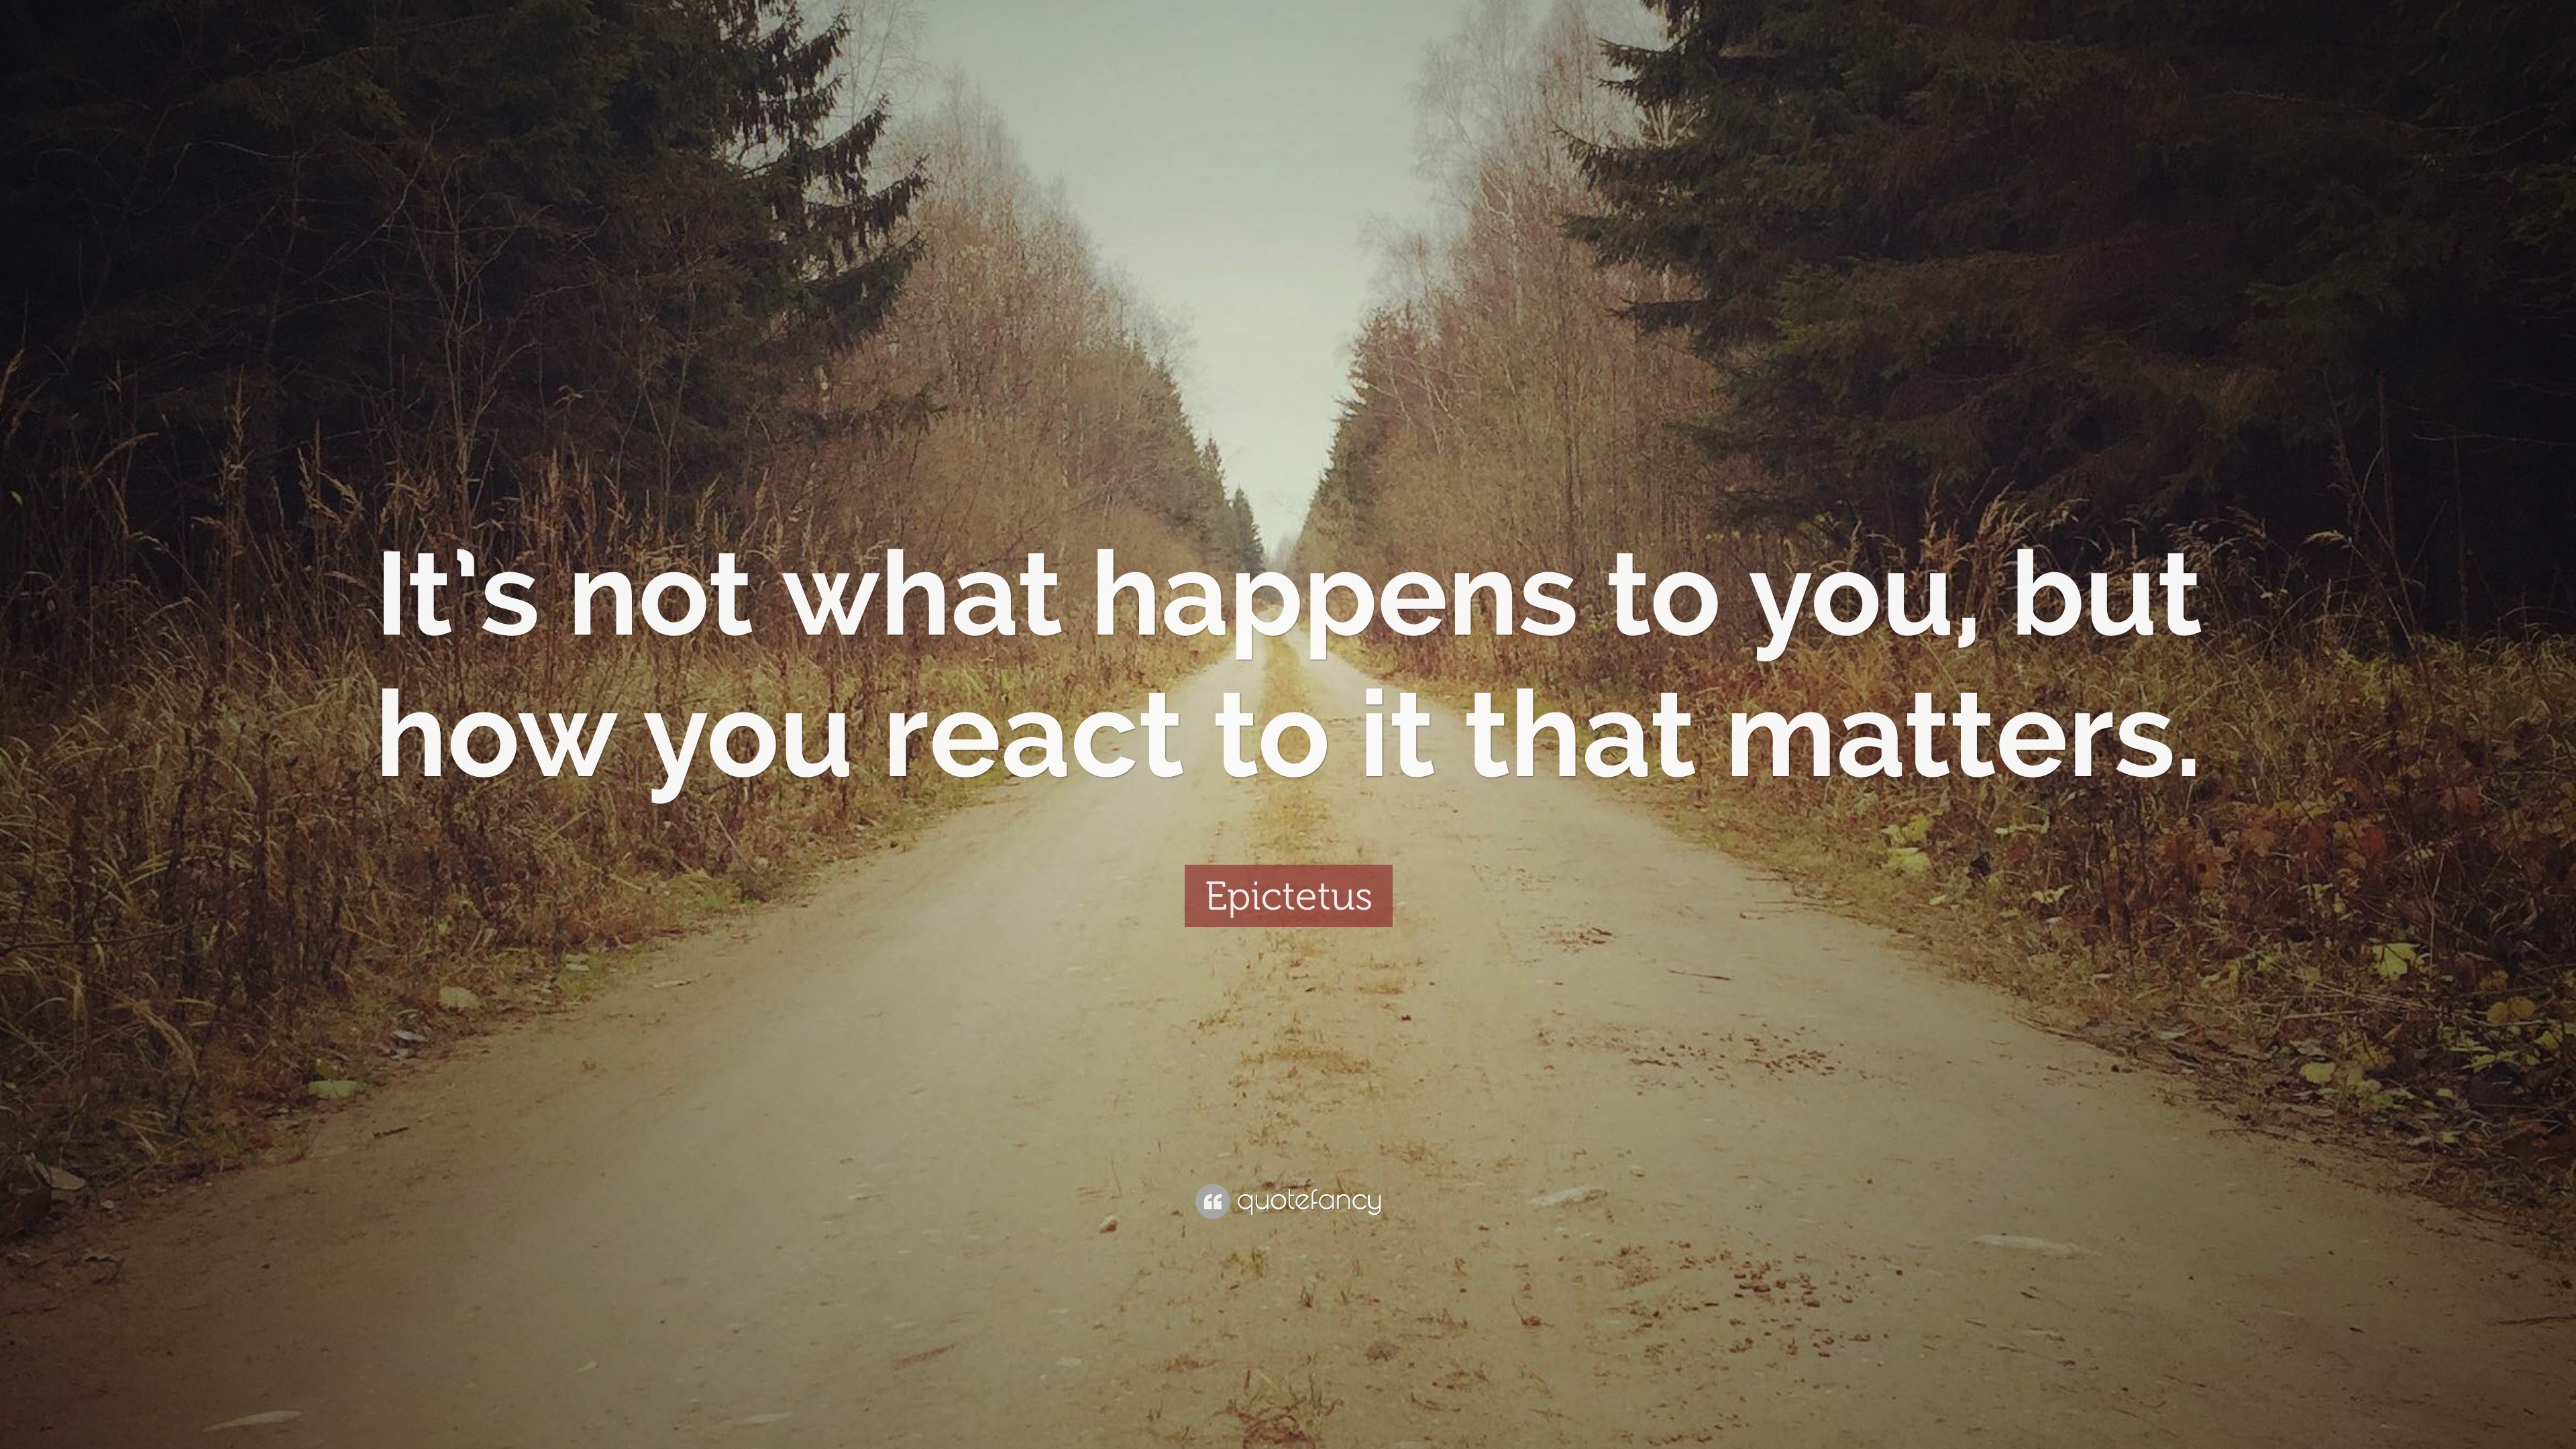 Epictetus - It's not what happens to you, but how you